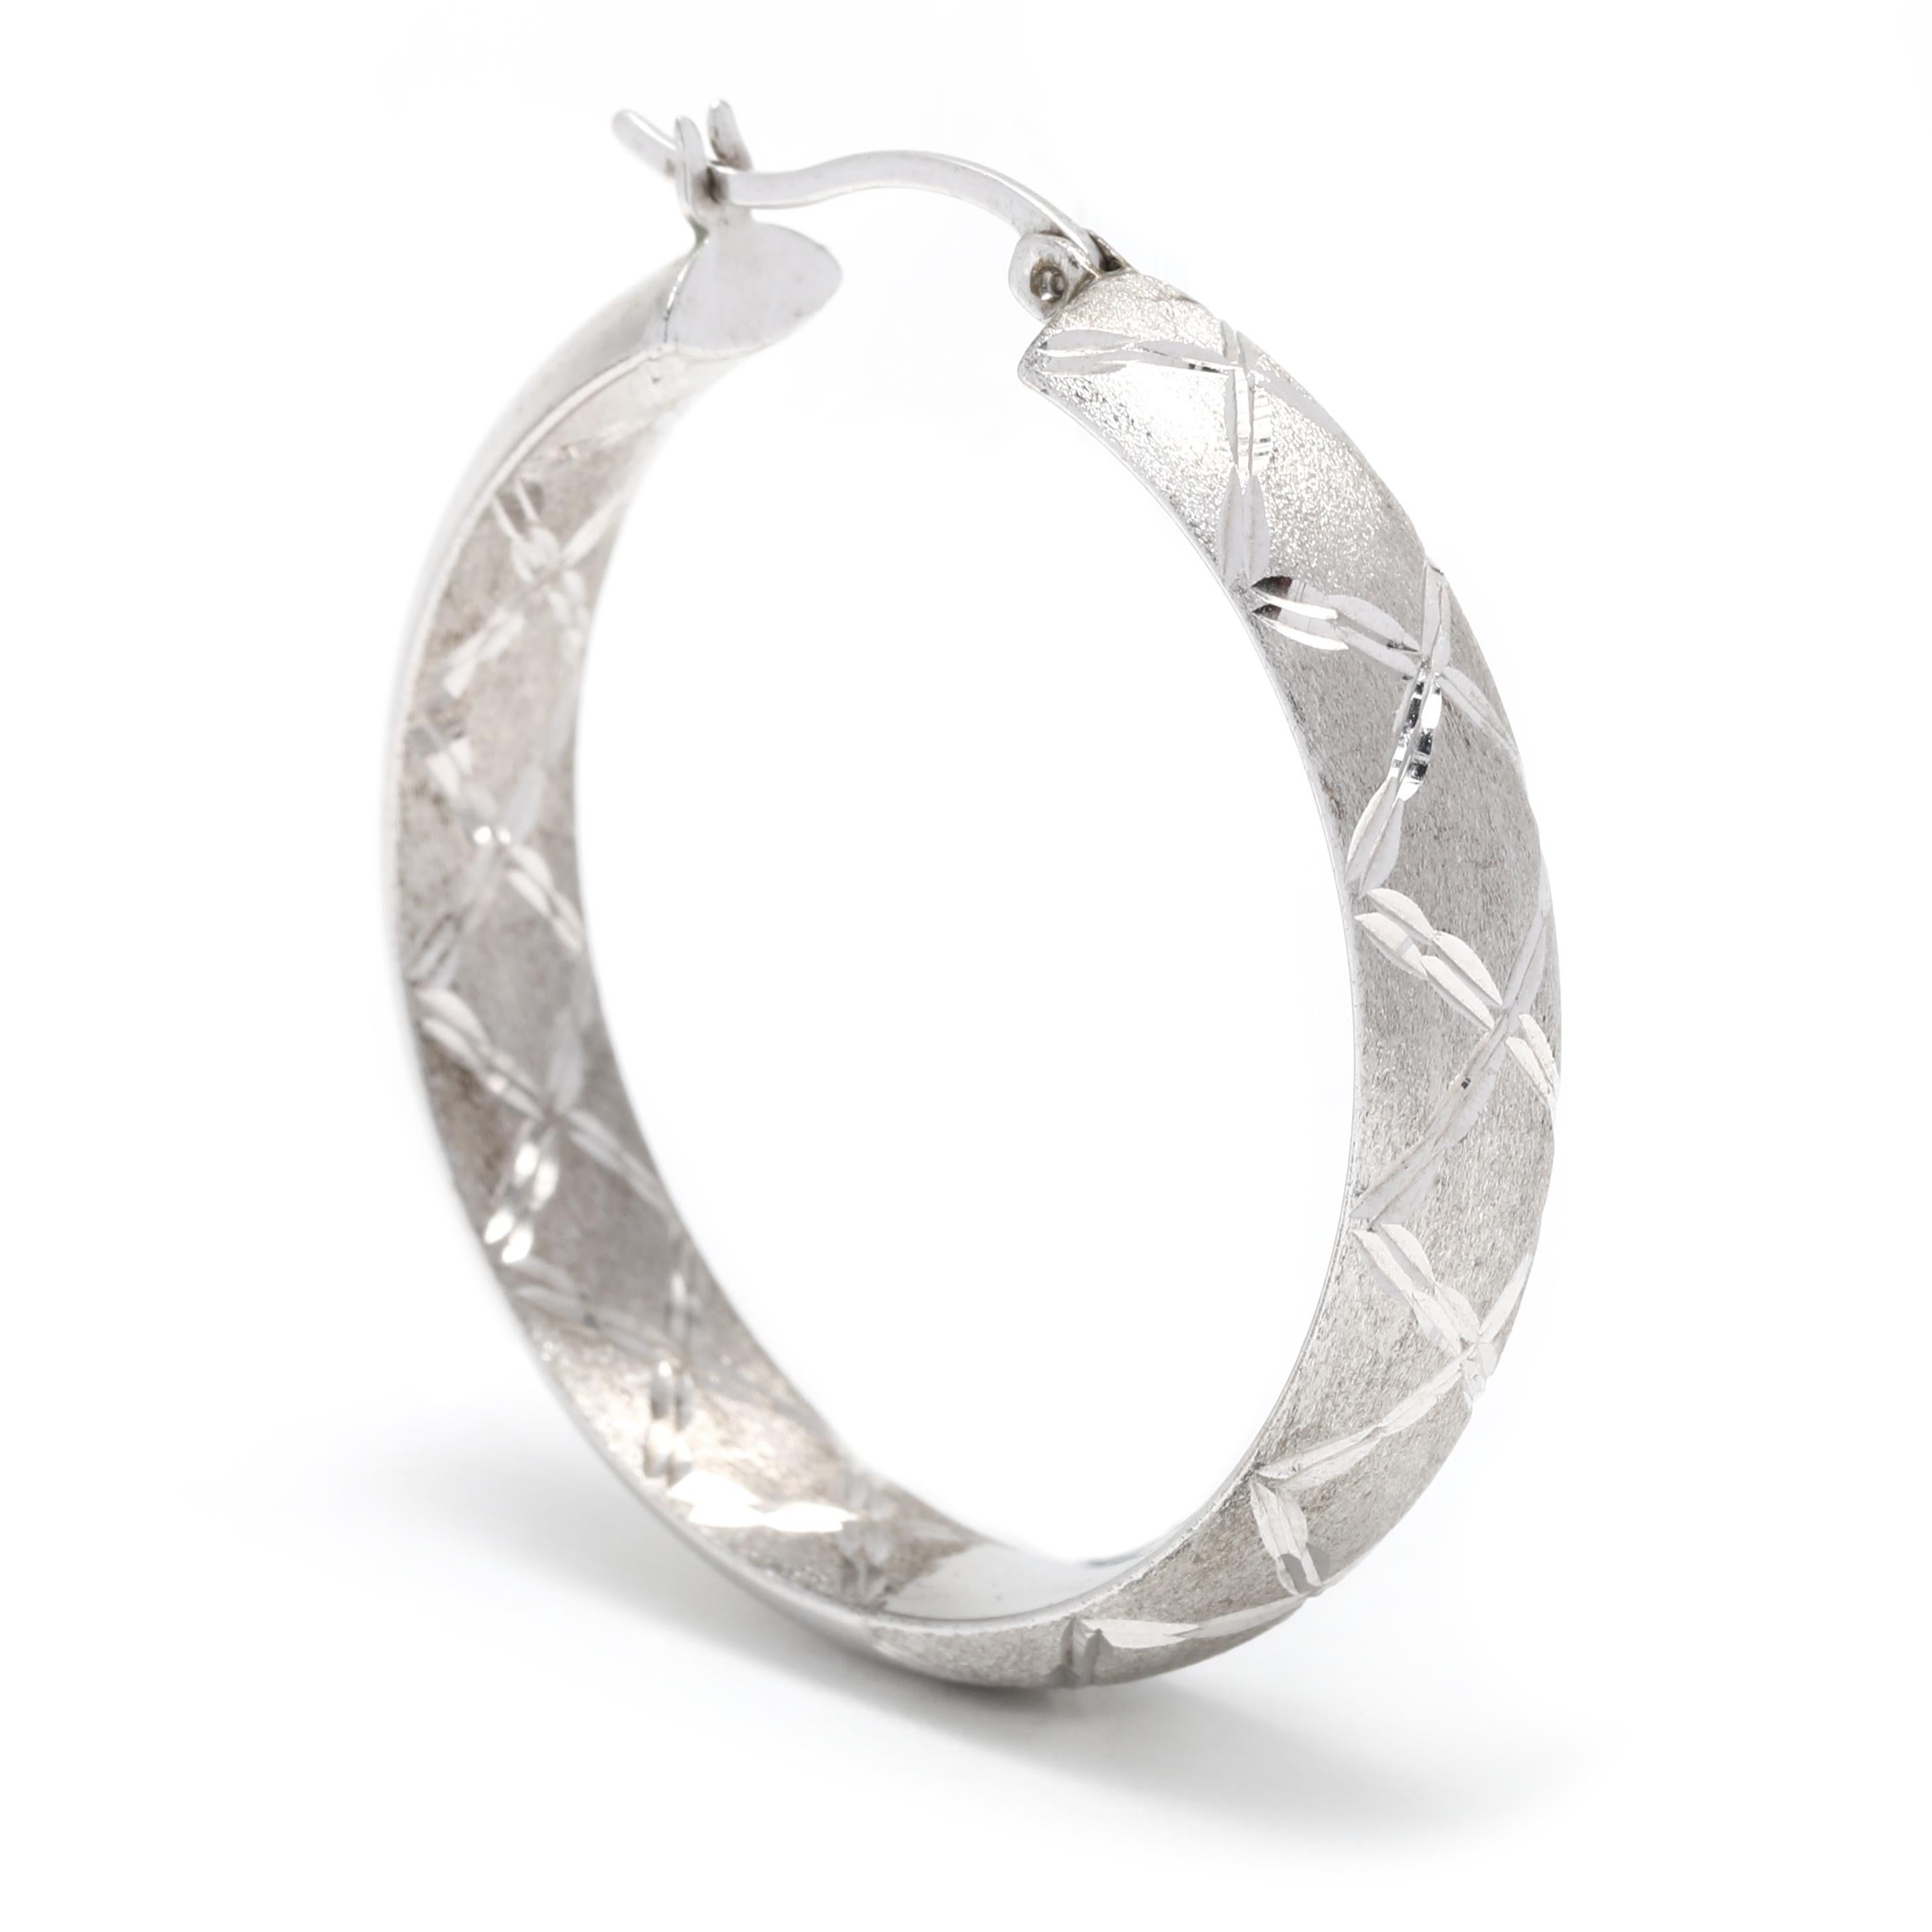 These classic sterling silver hoop earrings feature an etched design and a matte finish. Featuring a diameter of 1.25 inches and a thickness of 1.5mm, these vintage-inspired hoops have a timeless appeal that is sure to be treasured for years to